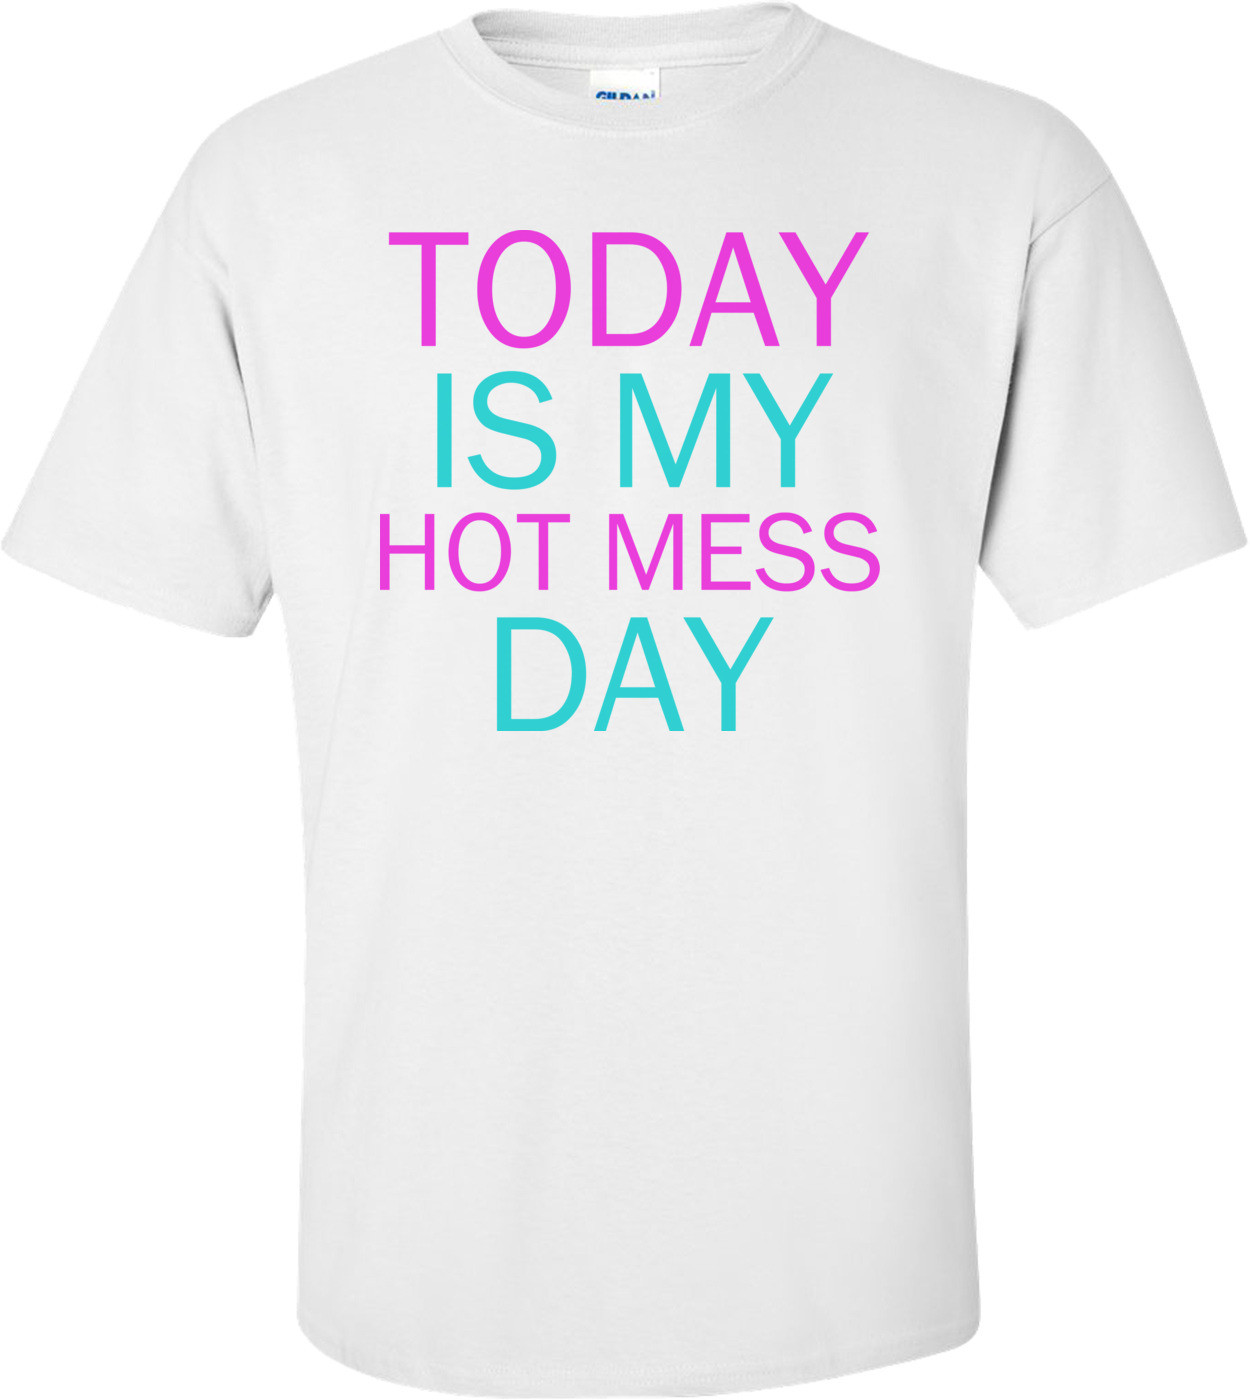 Today Is My Hot Mess Day Shirt